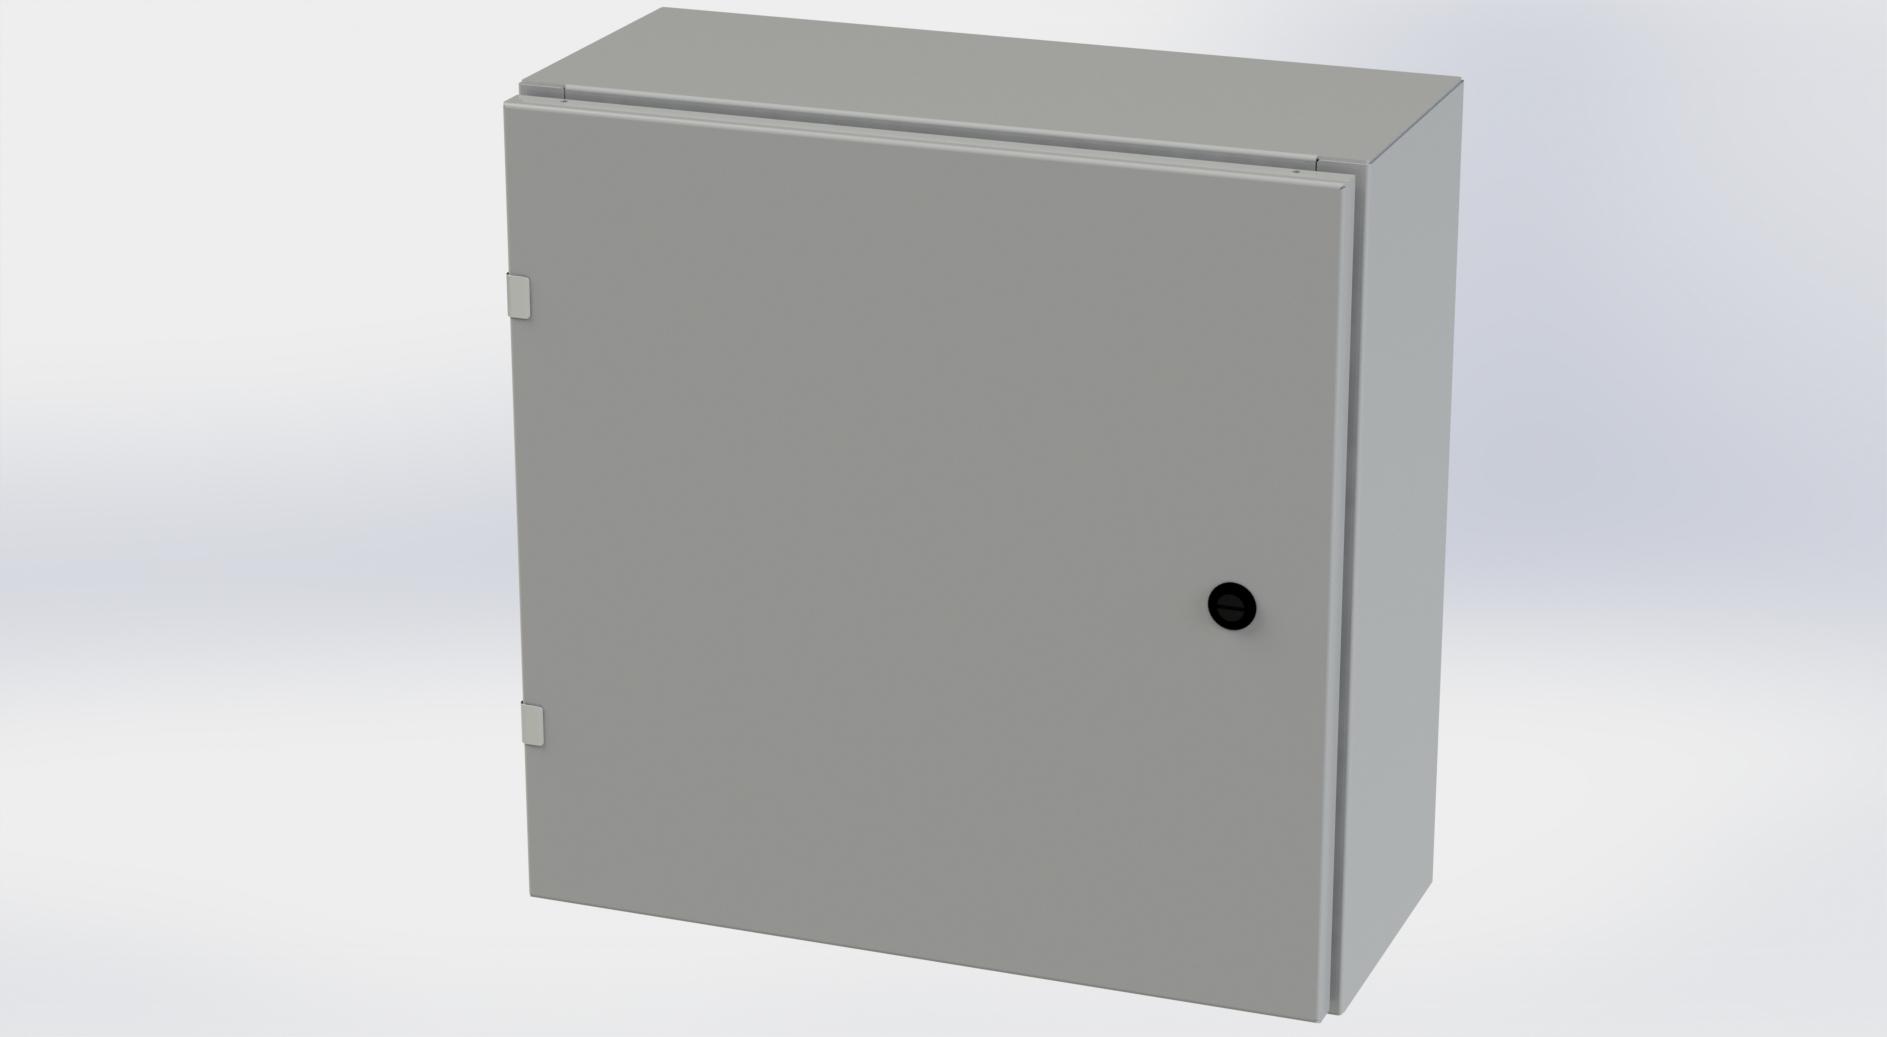 Saginaw Control SCE-20EL2008LP EL Enclosure, Height:20.00", Width:20.00", Depth:8.00", ANSI-61 gray powder coating inside and out. Optional sub-panels are powder coated white.